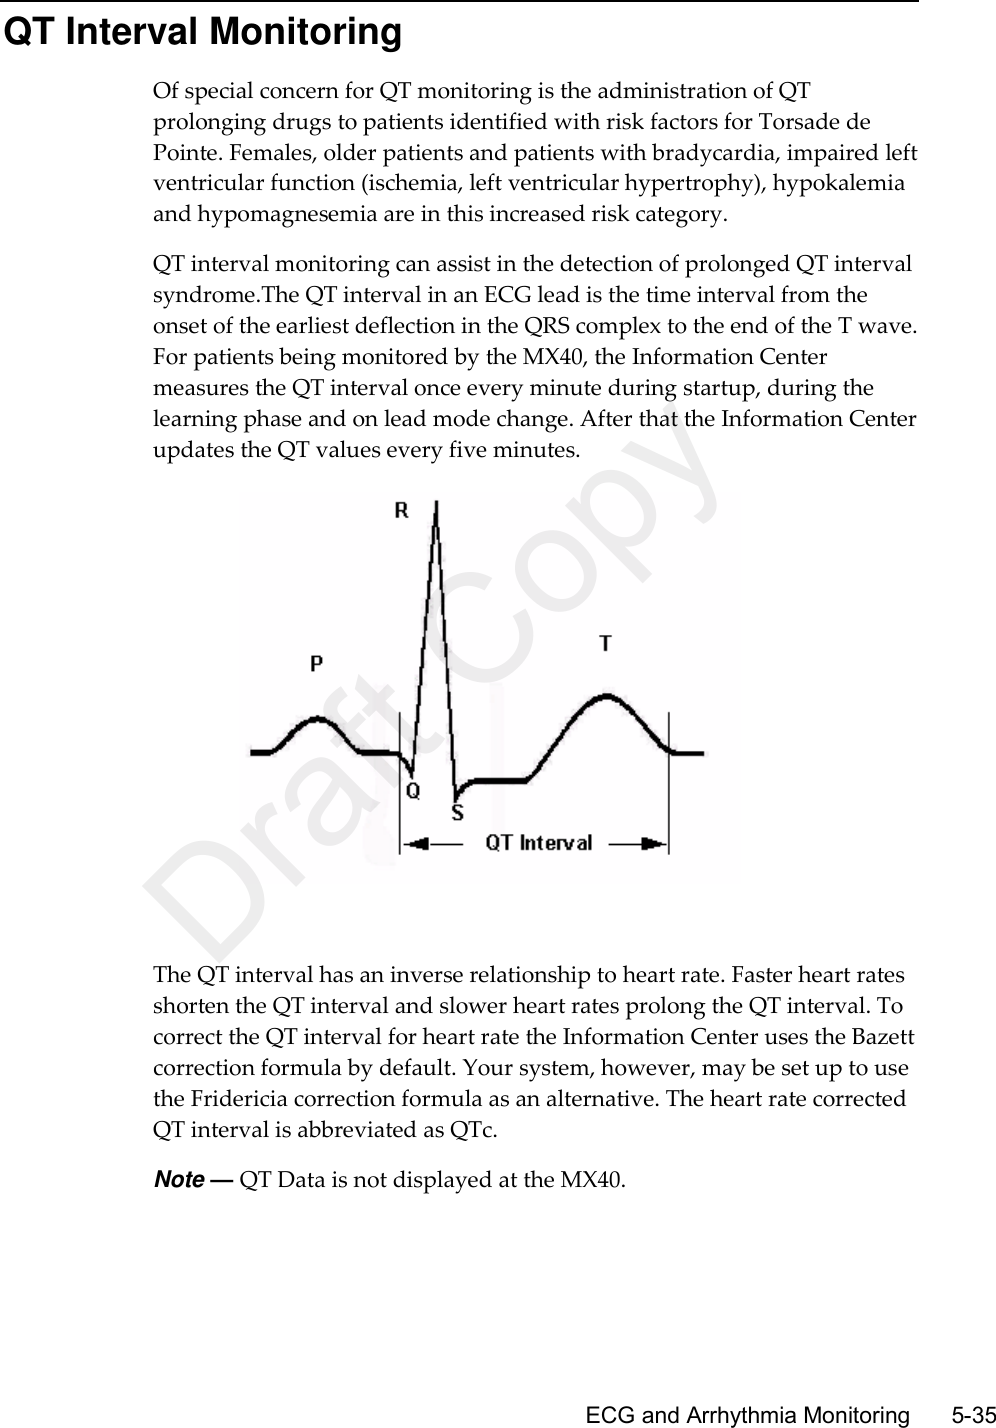      ECG and Arrhythmia Monitoring        5-35 QT Interval Monitoring Of special concern for QT monitoring is the administration of QT prolonging drugs to patients identified with risk factors for Torsade de Pointe. Females, older patients and patients with bradycardia, impaired left ventricular function (ischemia, left ventricular hypertrophy), hypokalemia and hypomagnesemia are in this increased risk category. QT interval monitoring can assist in the detection of prolonged QT interval syndrome.The QT interval in an ECG lead is the time interval from the onset of the earliest deflection in the QRS complex to the end of the T wave. For patients being monitored by the MX40, the Information Center measures the QT interval once every minute during startup, during the learning phase and on lead mode change. After that the Information Center updates the QT values every five minutes.   The QT interval has an inverse relationship to heart rate. Faster heart rates shorten the QT interval and slower heart rates prolong the QT interval. To correct the QT interval for heart rate the Information Center uses the Bazett correction formula by default. Your system, however, may be set up to use the Fridericia correction formula as an alternative. The heart rate corrected QT interval is abbreviated as QTc. Note — QT Data is not displayed at the MX40.  Draft Copy